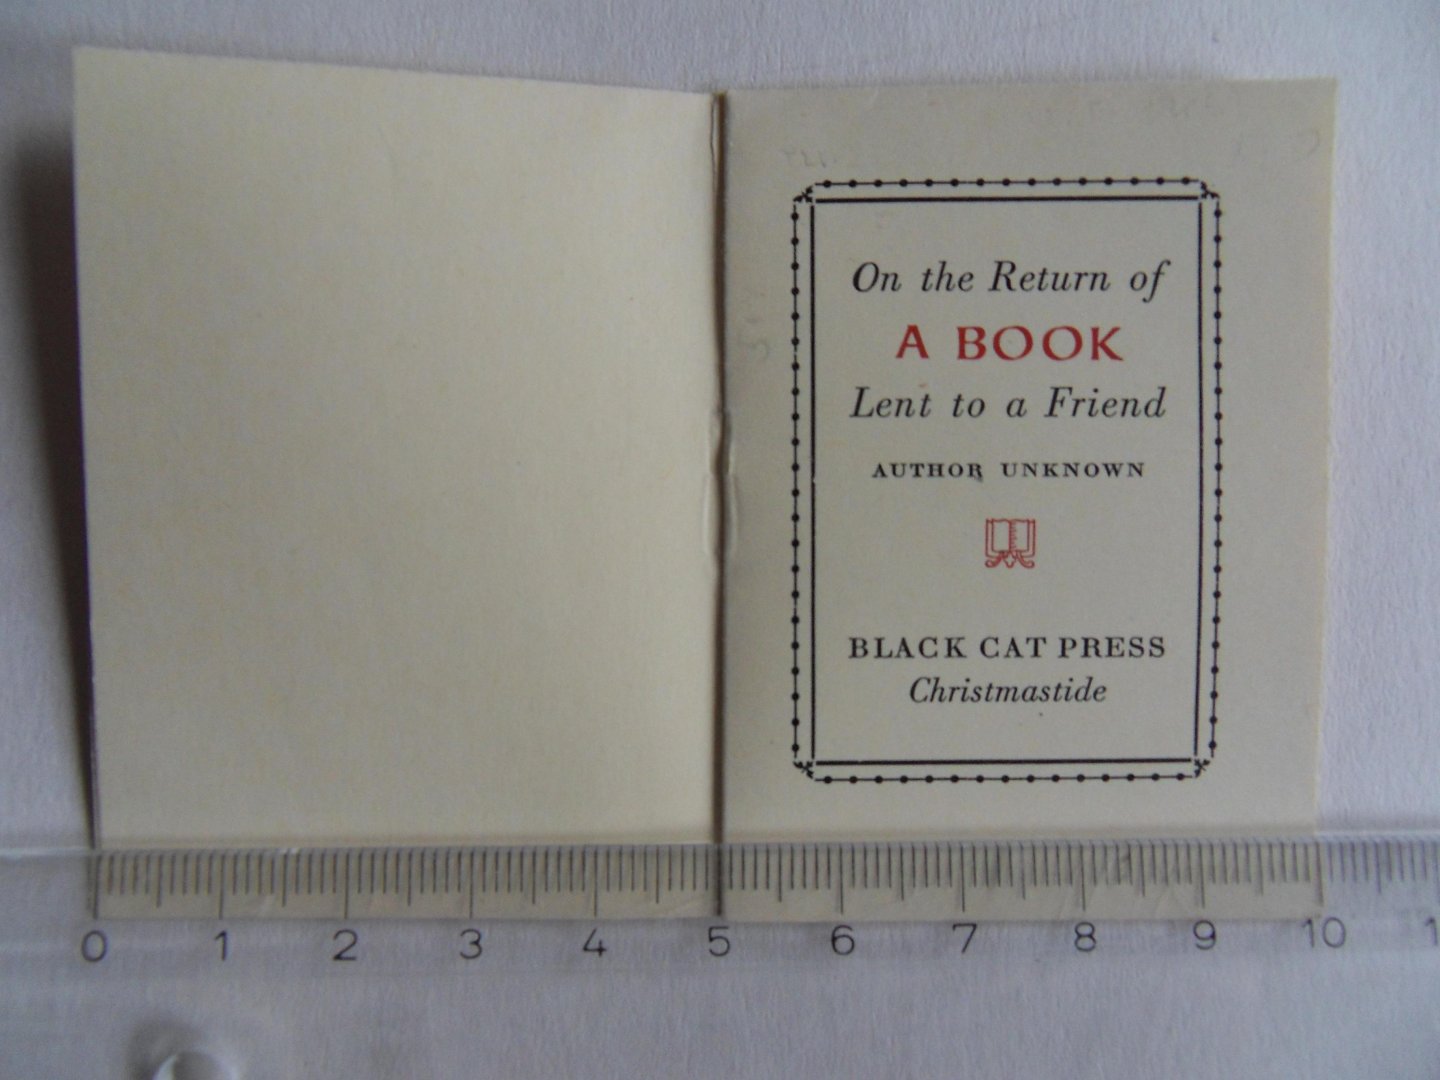 Author Unknown. [ Probably Norman W. Forgue - printer of the Black Cat Press ]. - On the Return of A BOOK Lent to a Friend. [ 500 copies only ].